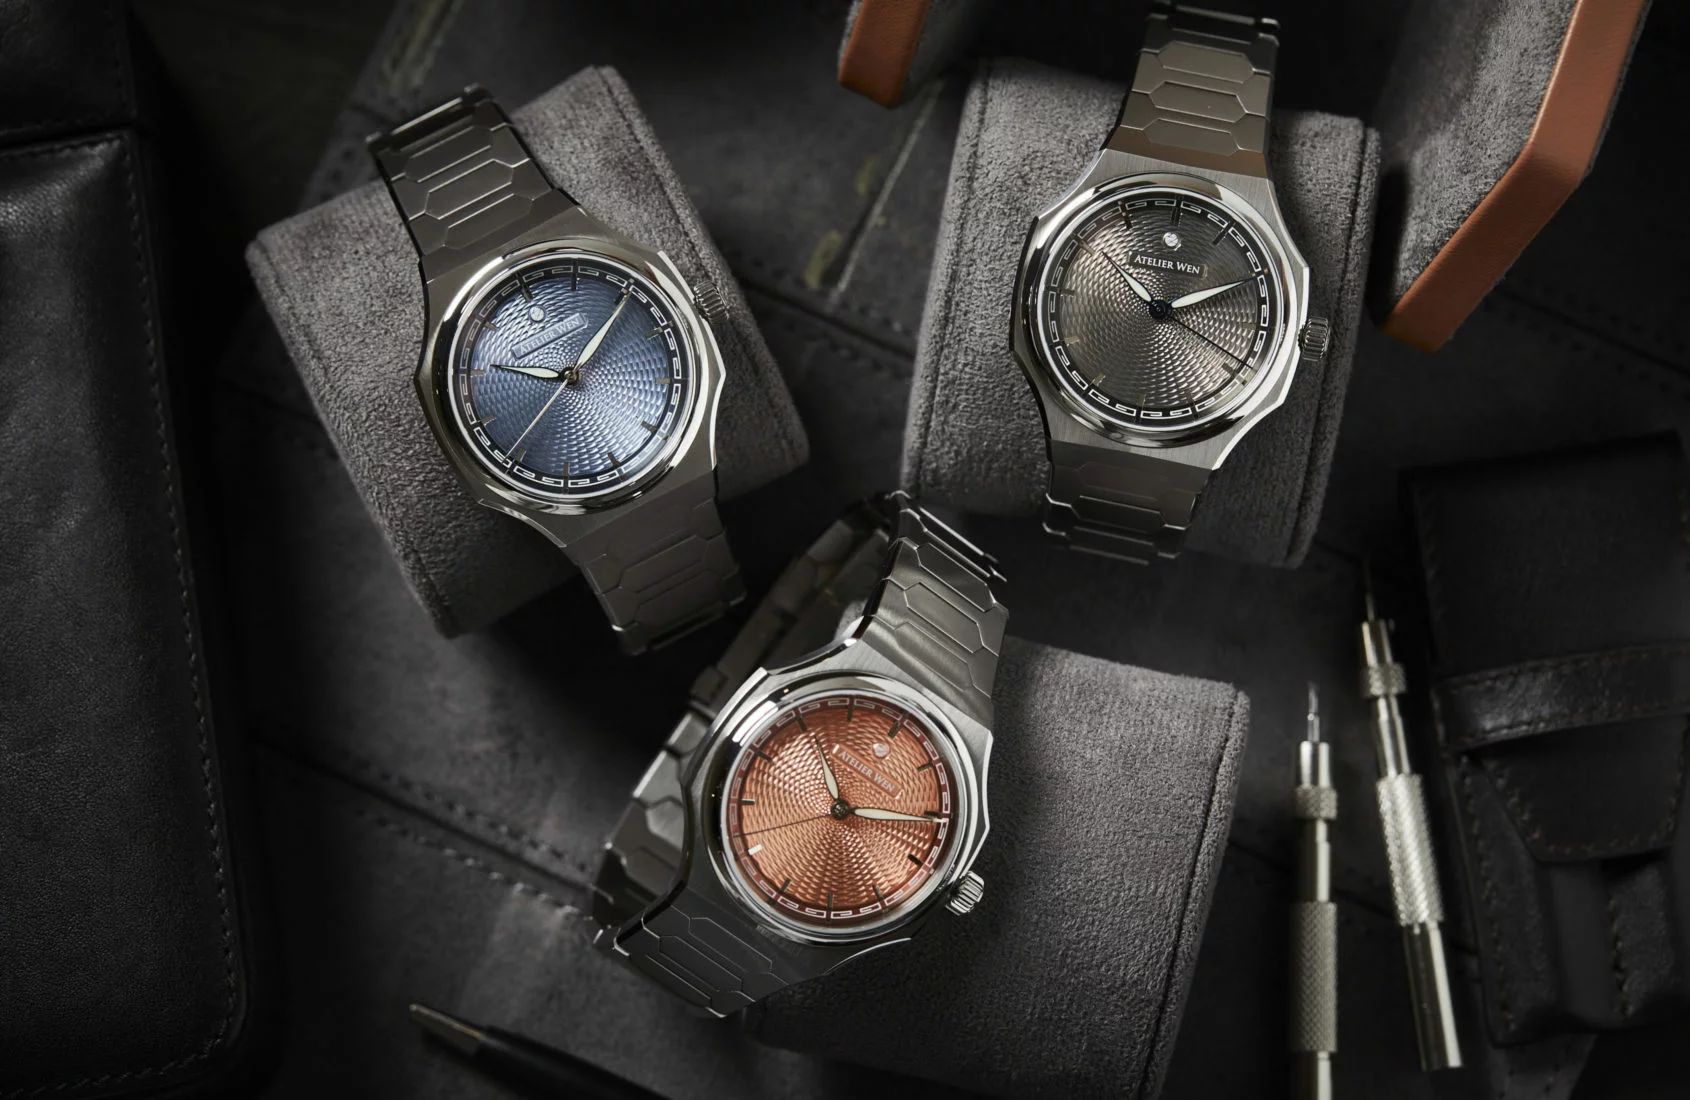 Made in China' watches gain domestic popularity